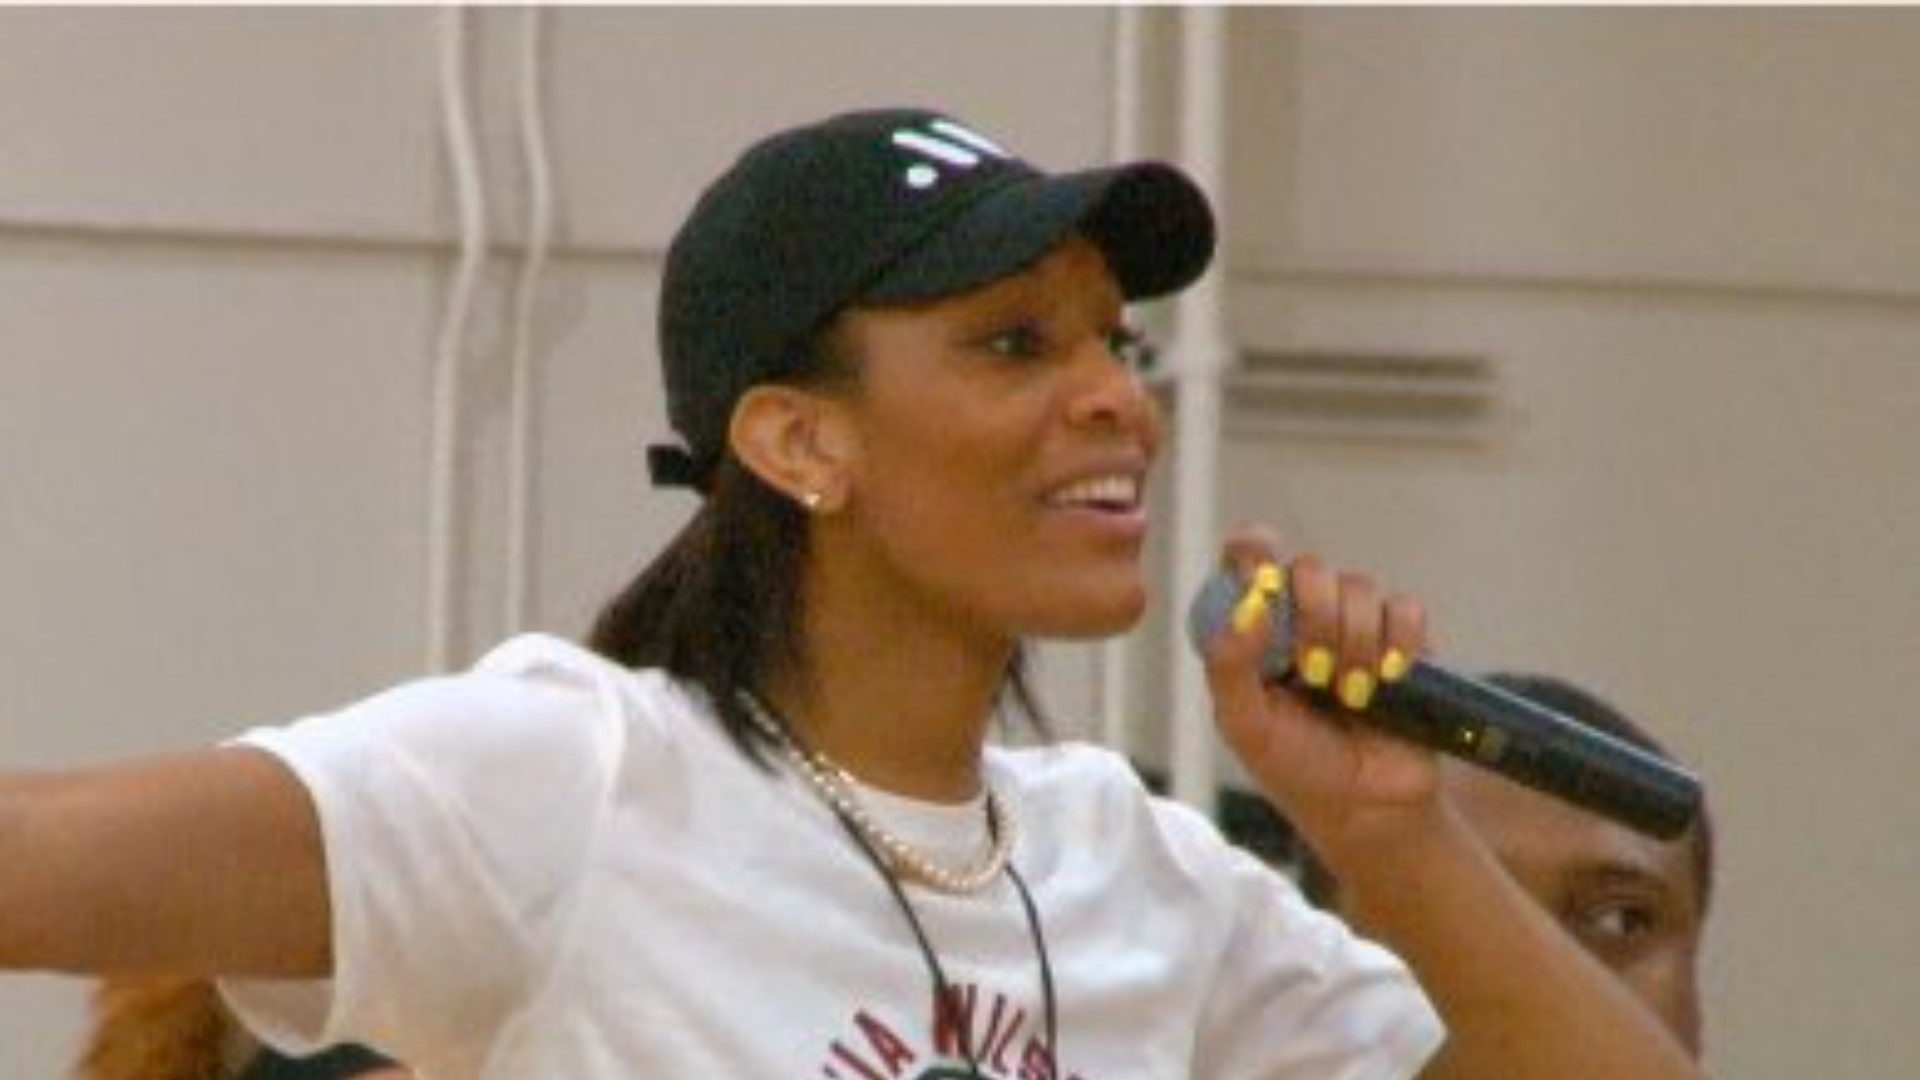 A'ja Wilson returned to her old high school, Heathwood Hall, to give back to next generation of players who aspire to be the next A'ja Wilson and become the best players they can be.